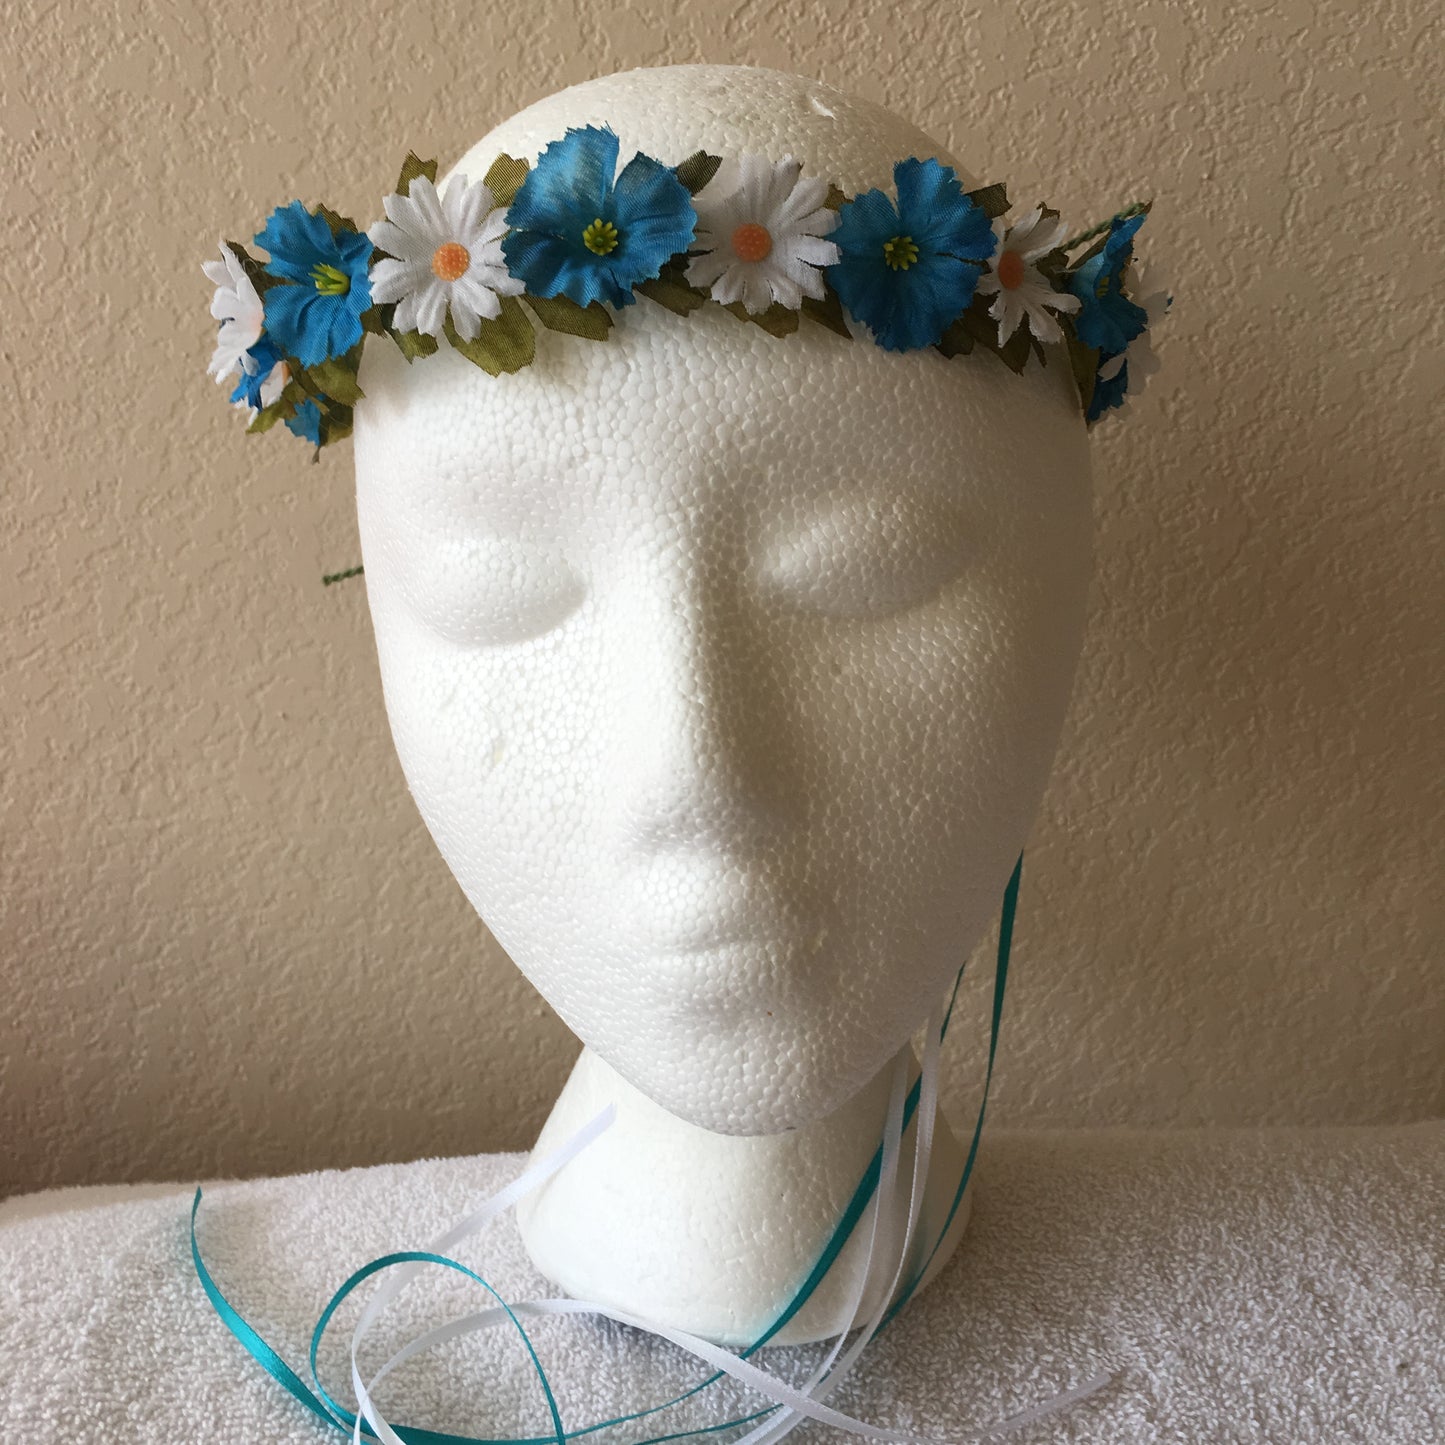 Extra Small Wreath - Teal & white daisies +